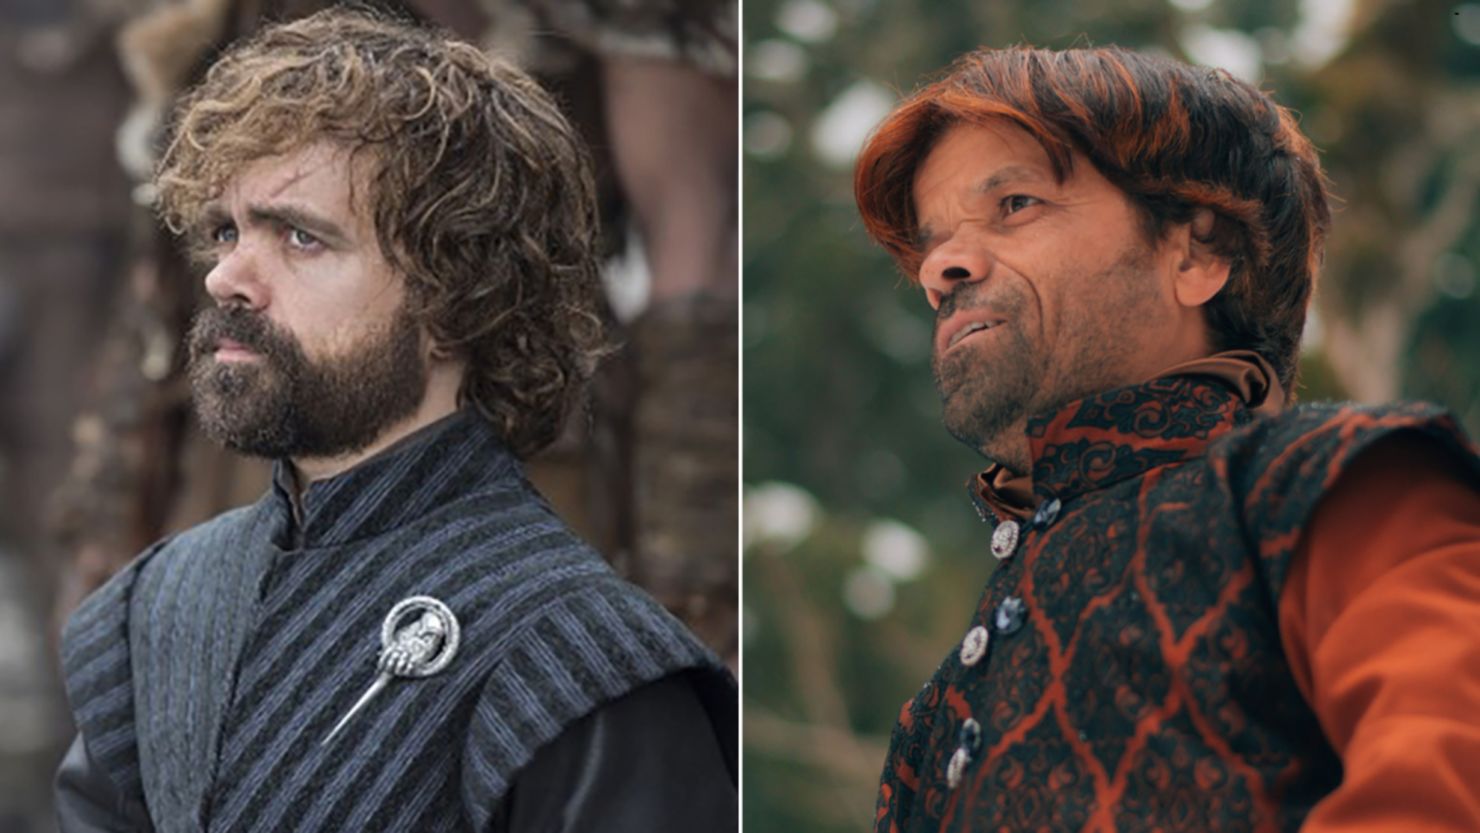 Tariq Mir (R) resembles American actor Peter Dinklage, who starred as Tyrion Lannister in Game of Thrones.